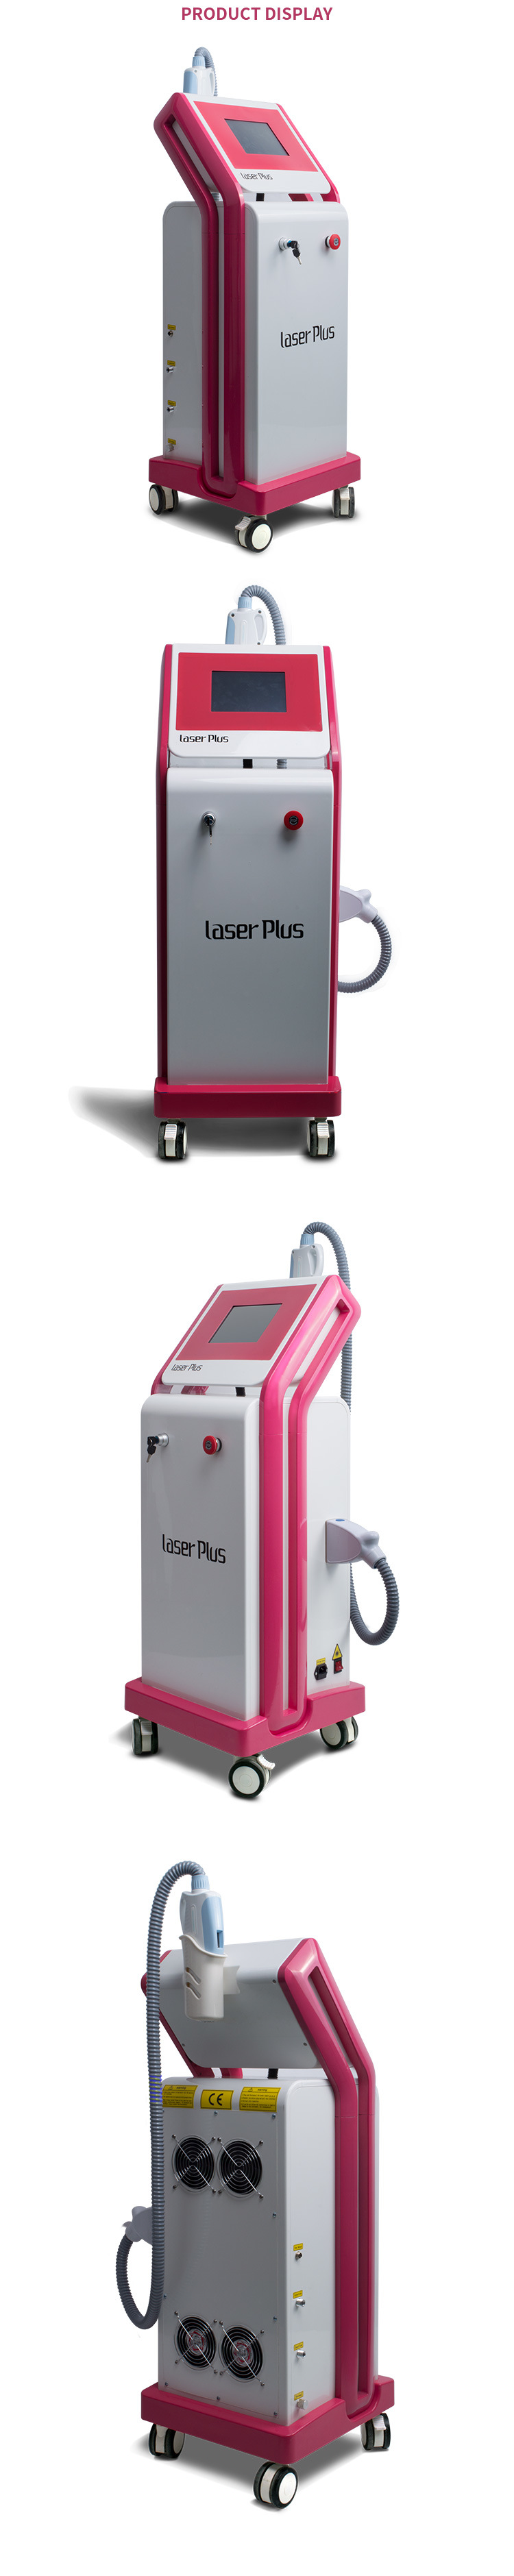 ND YAG Laser Permanent Tattoo Removal Freckle Removal Laser Beauty Equipment